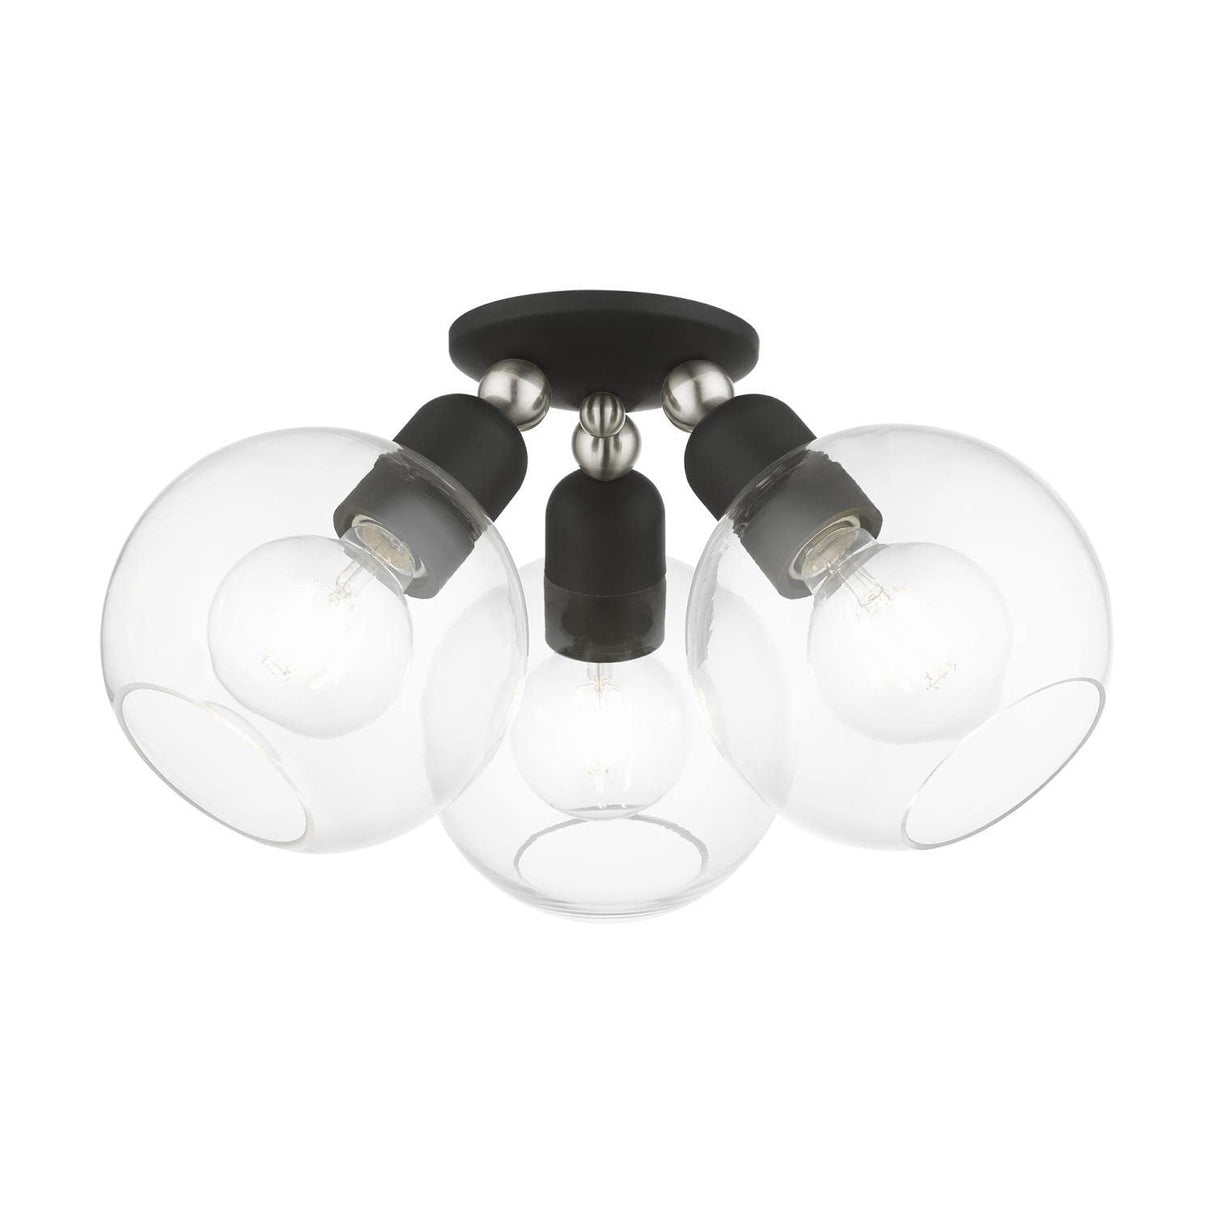 Downtown 3 Light Semi-Flush in Black with Brushed Nickel (48978-04)